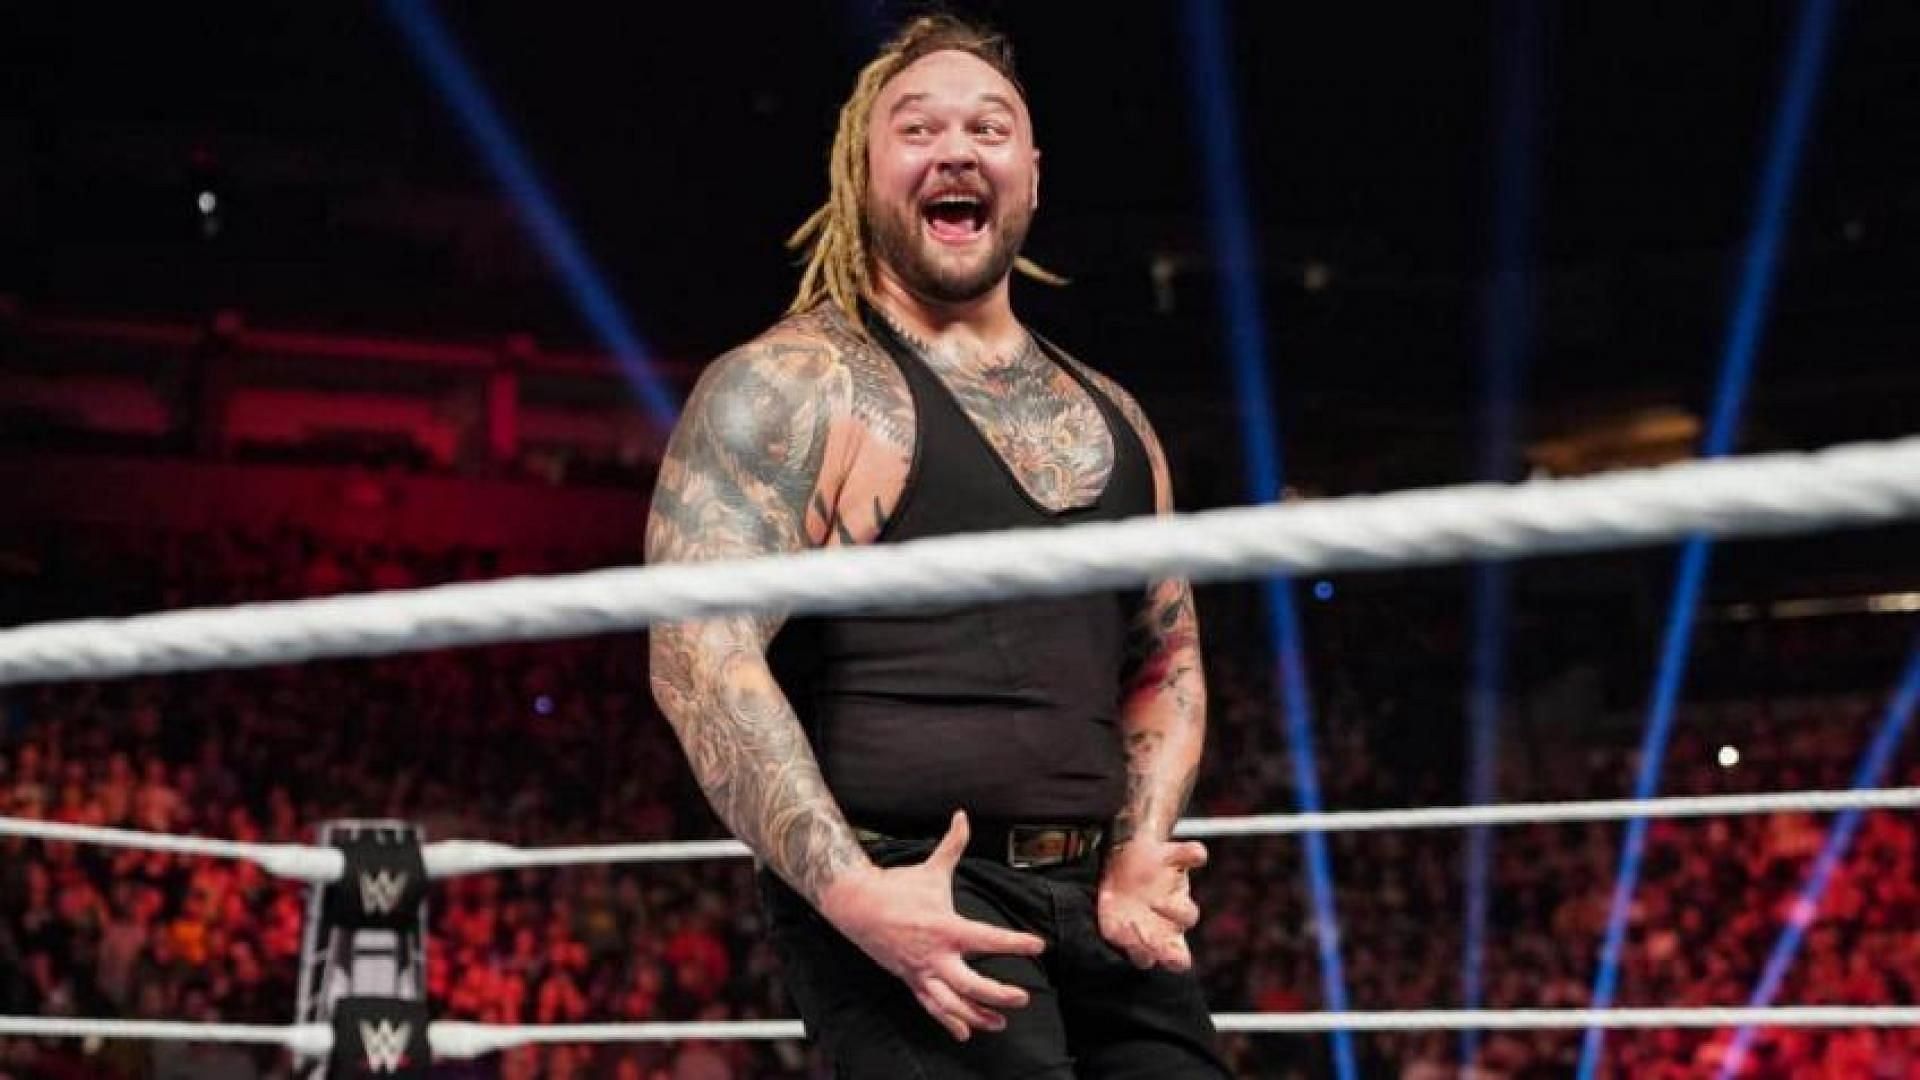 "I wouldn’t be surprised if he never came back" Bray Wyatt's friend